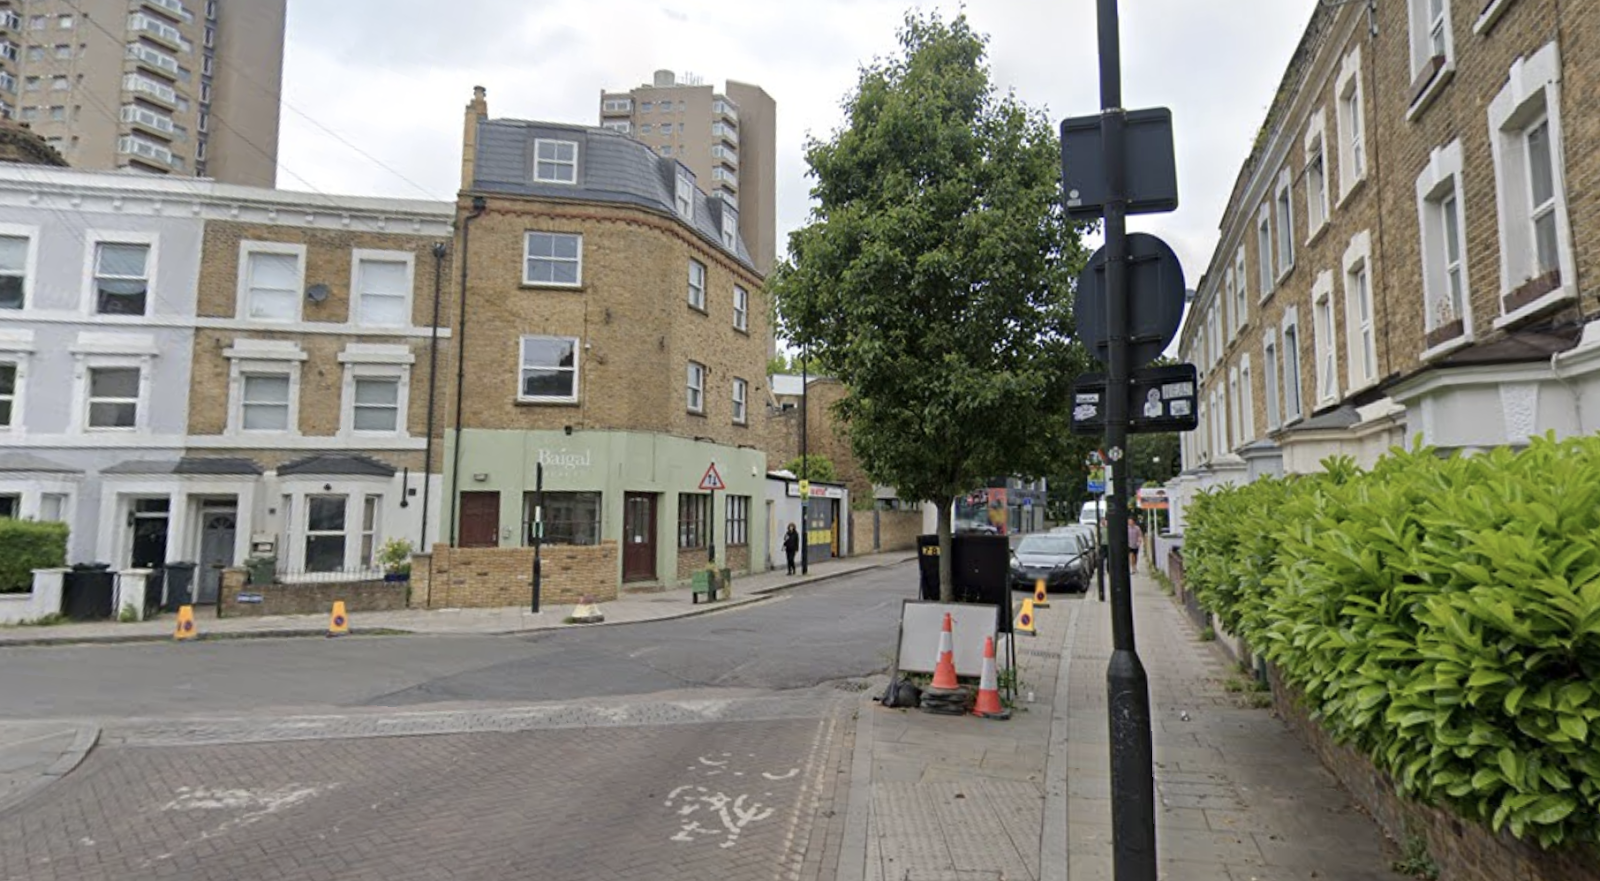 Google maps image showing an intersection of Railton Road and Rymer Street